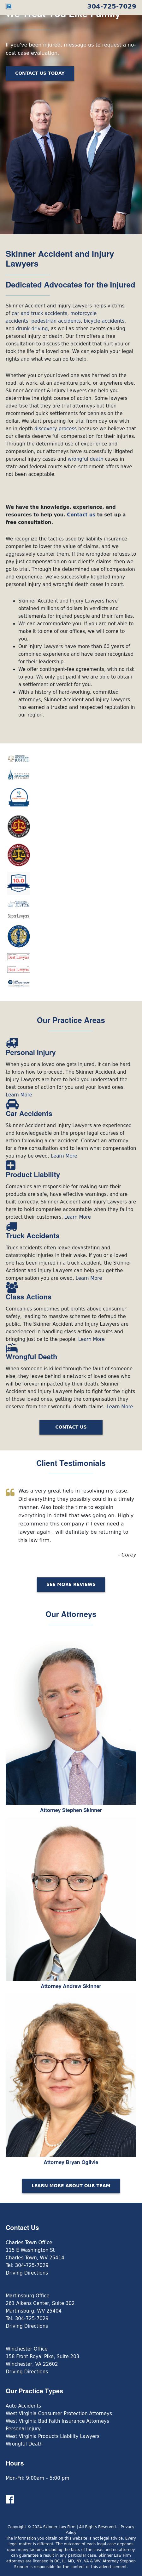 Skinner Law Firm - Charles Town WV Lawyers